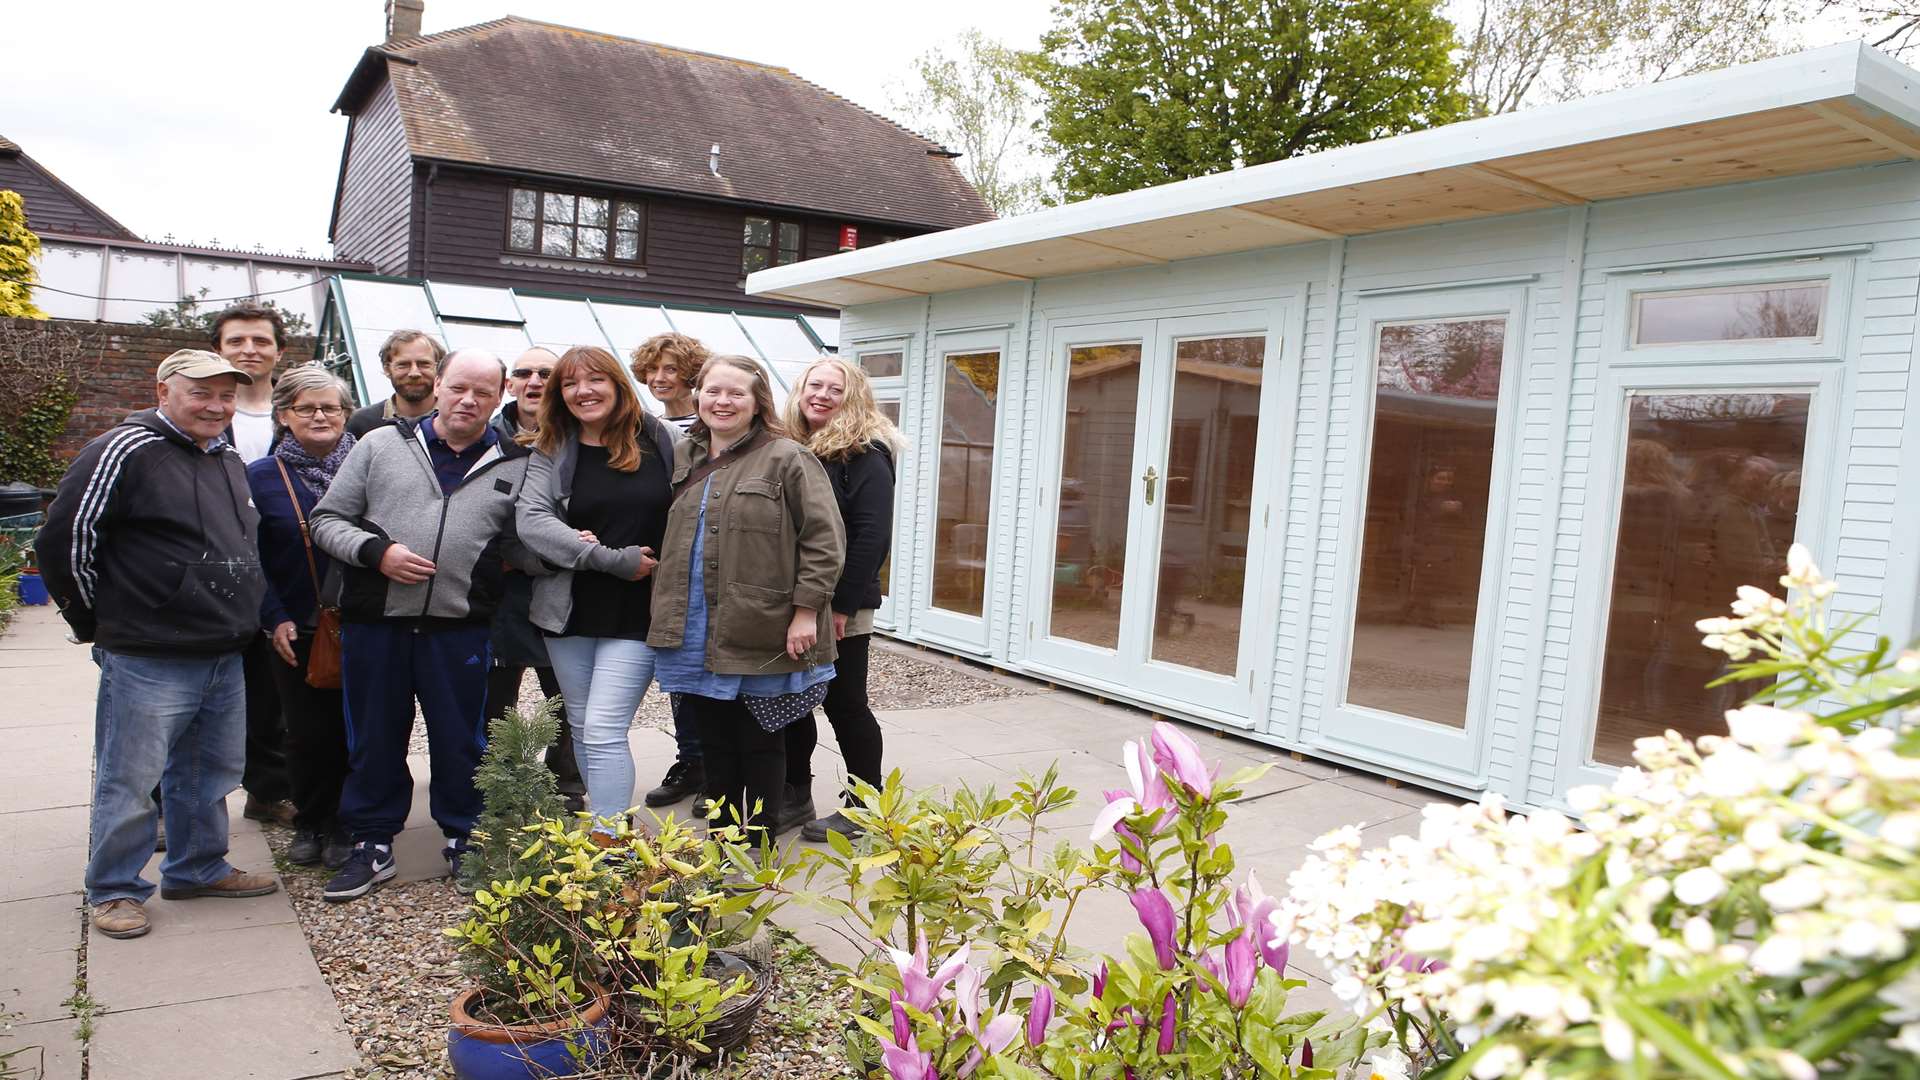 A brand new cabin has been built at the Abbey Physic Garden thanks to lottery funding.